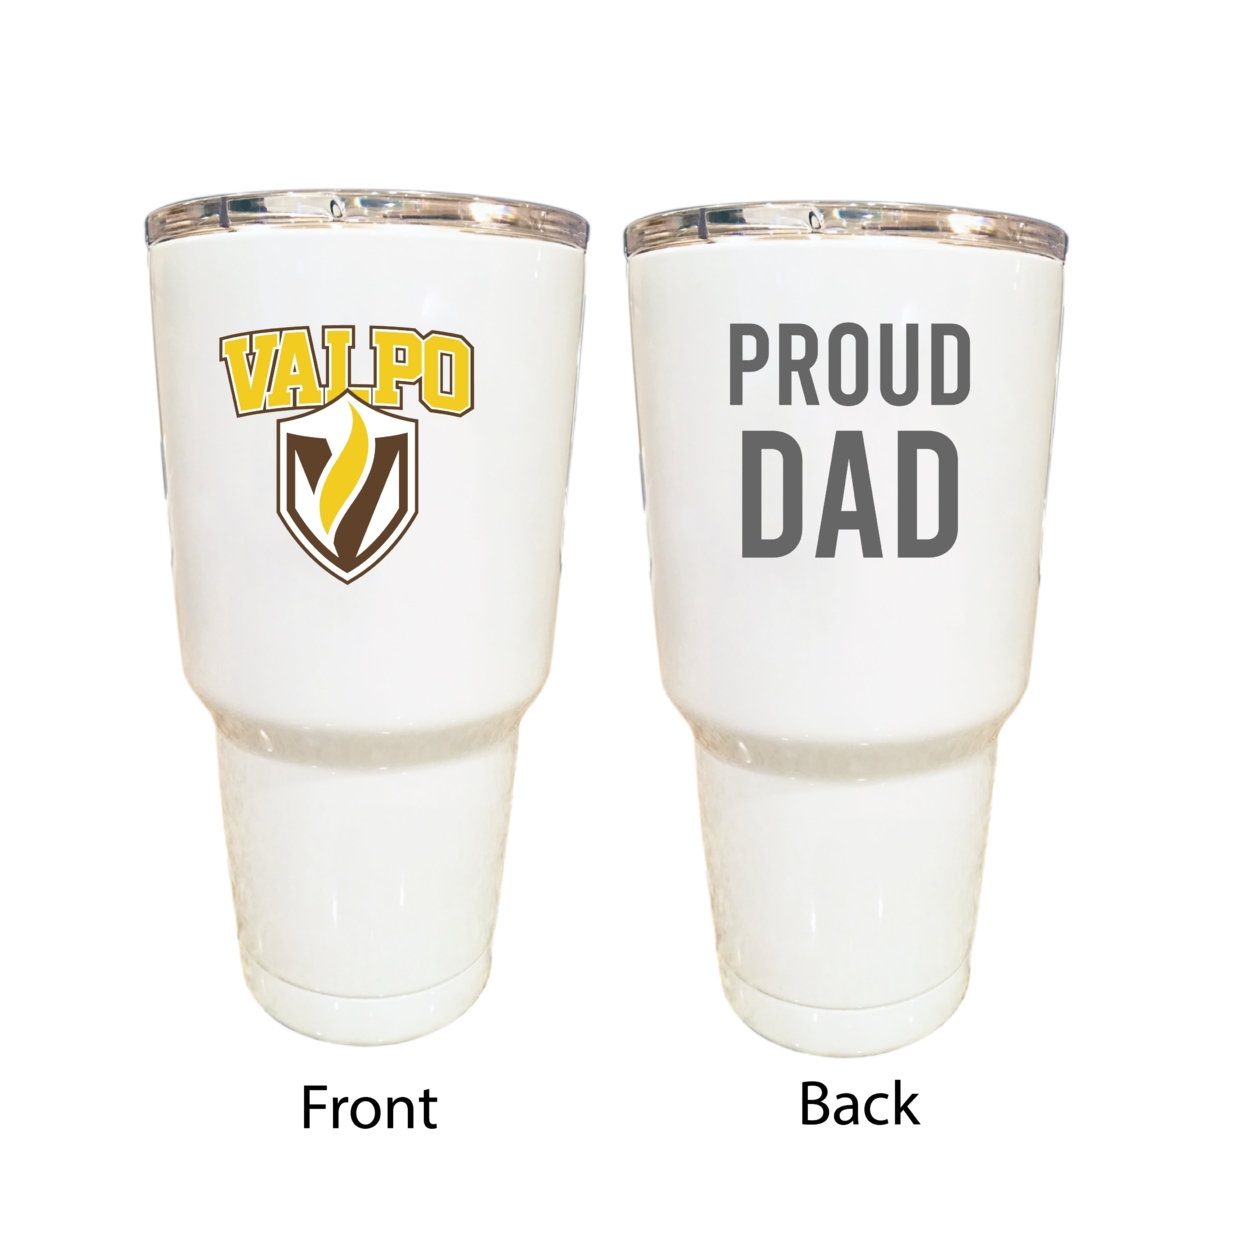 Valparaiso University Proud Dad 24 Oz Insulated Stainless Steel Tumblers Choose Your Color. - White